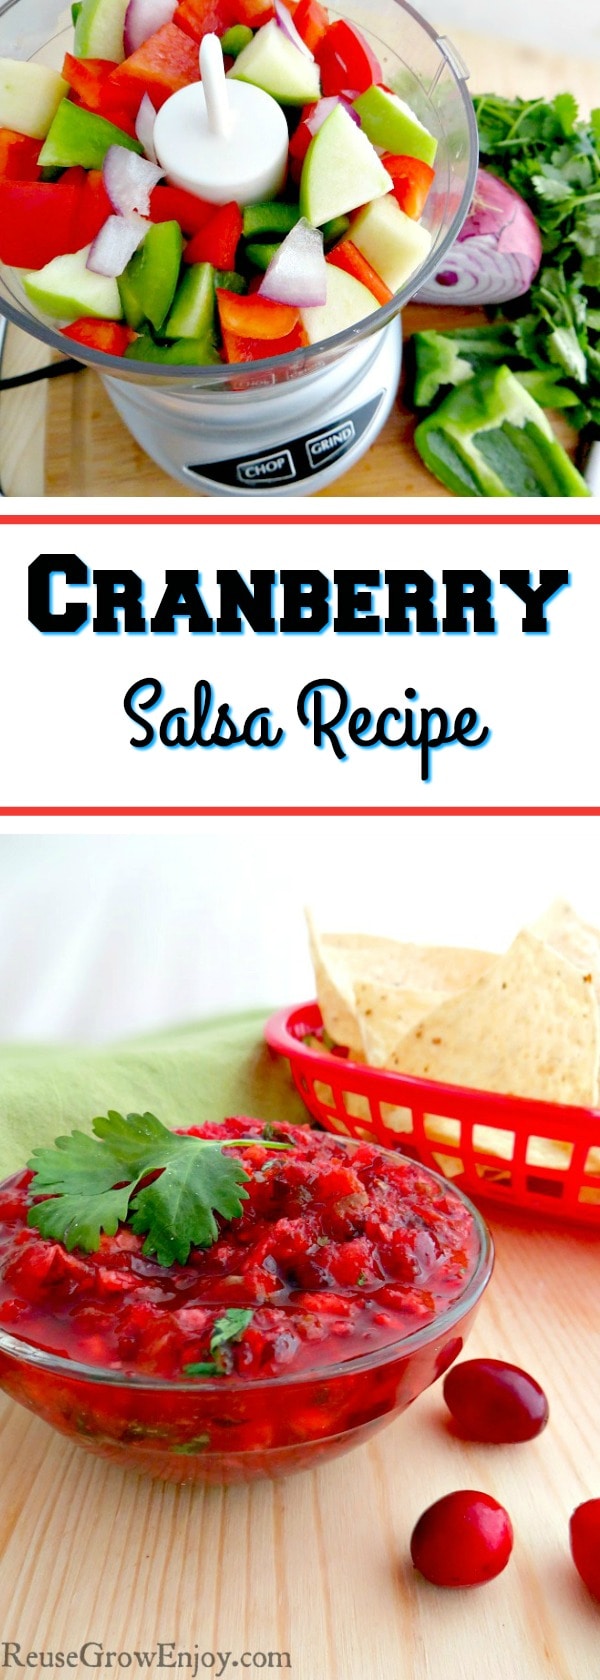 I have a wonderful new fall recipe for you to try. This cranberry salsa recipe is not only tasty, it is super easy to make too!